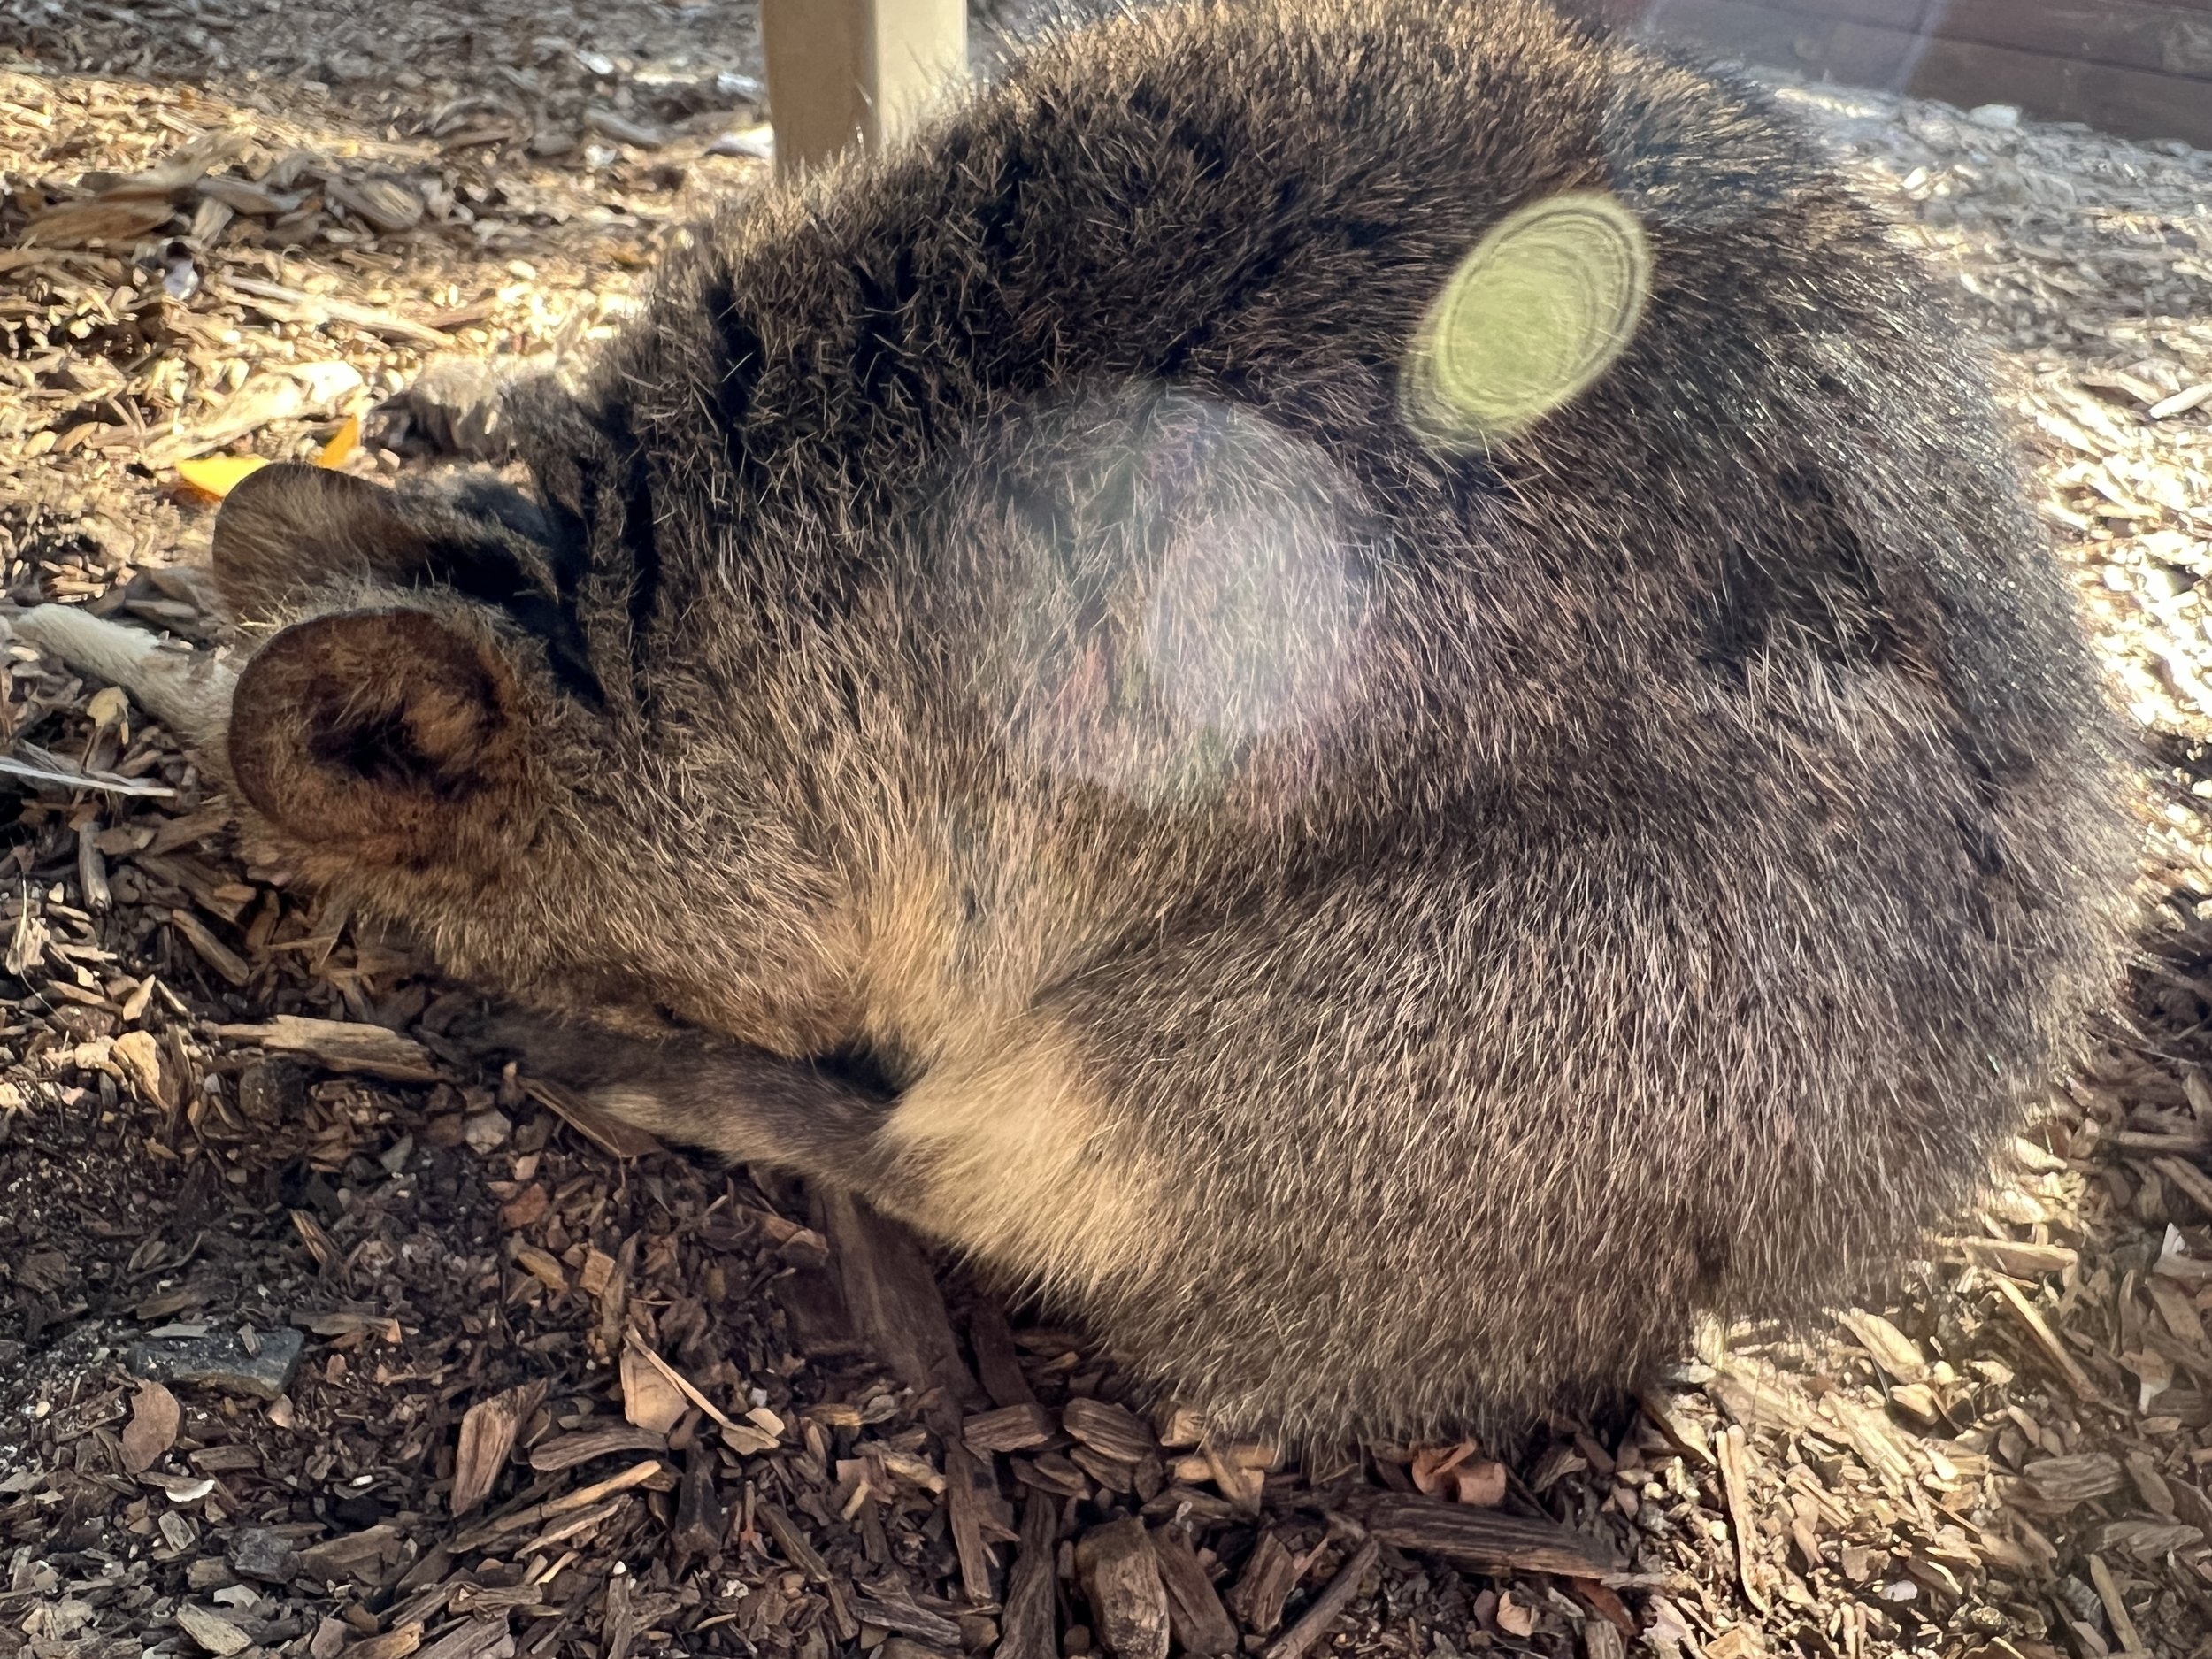 This is how quokkas sleep - curled up